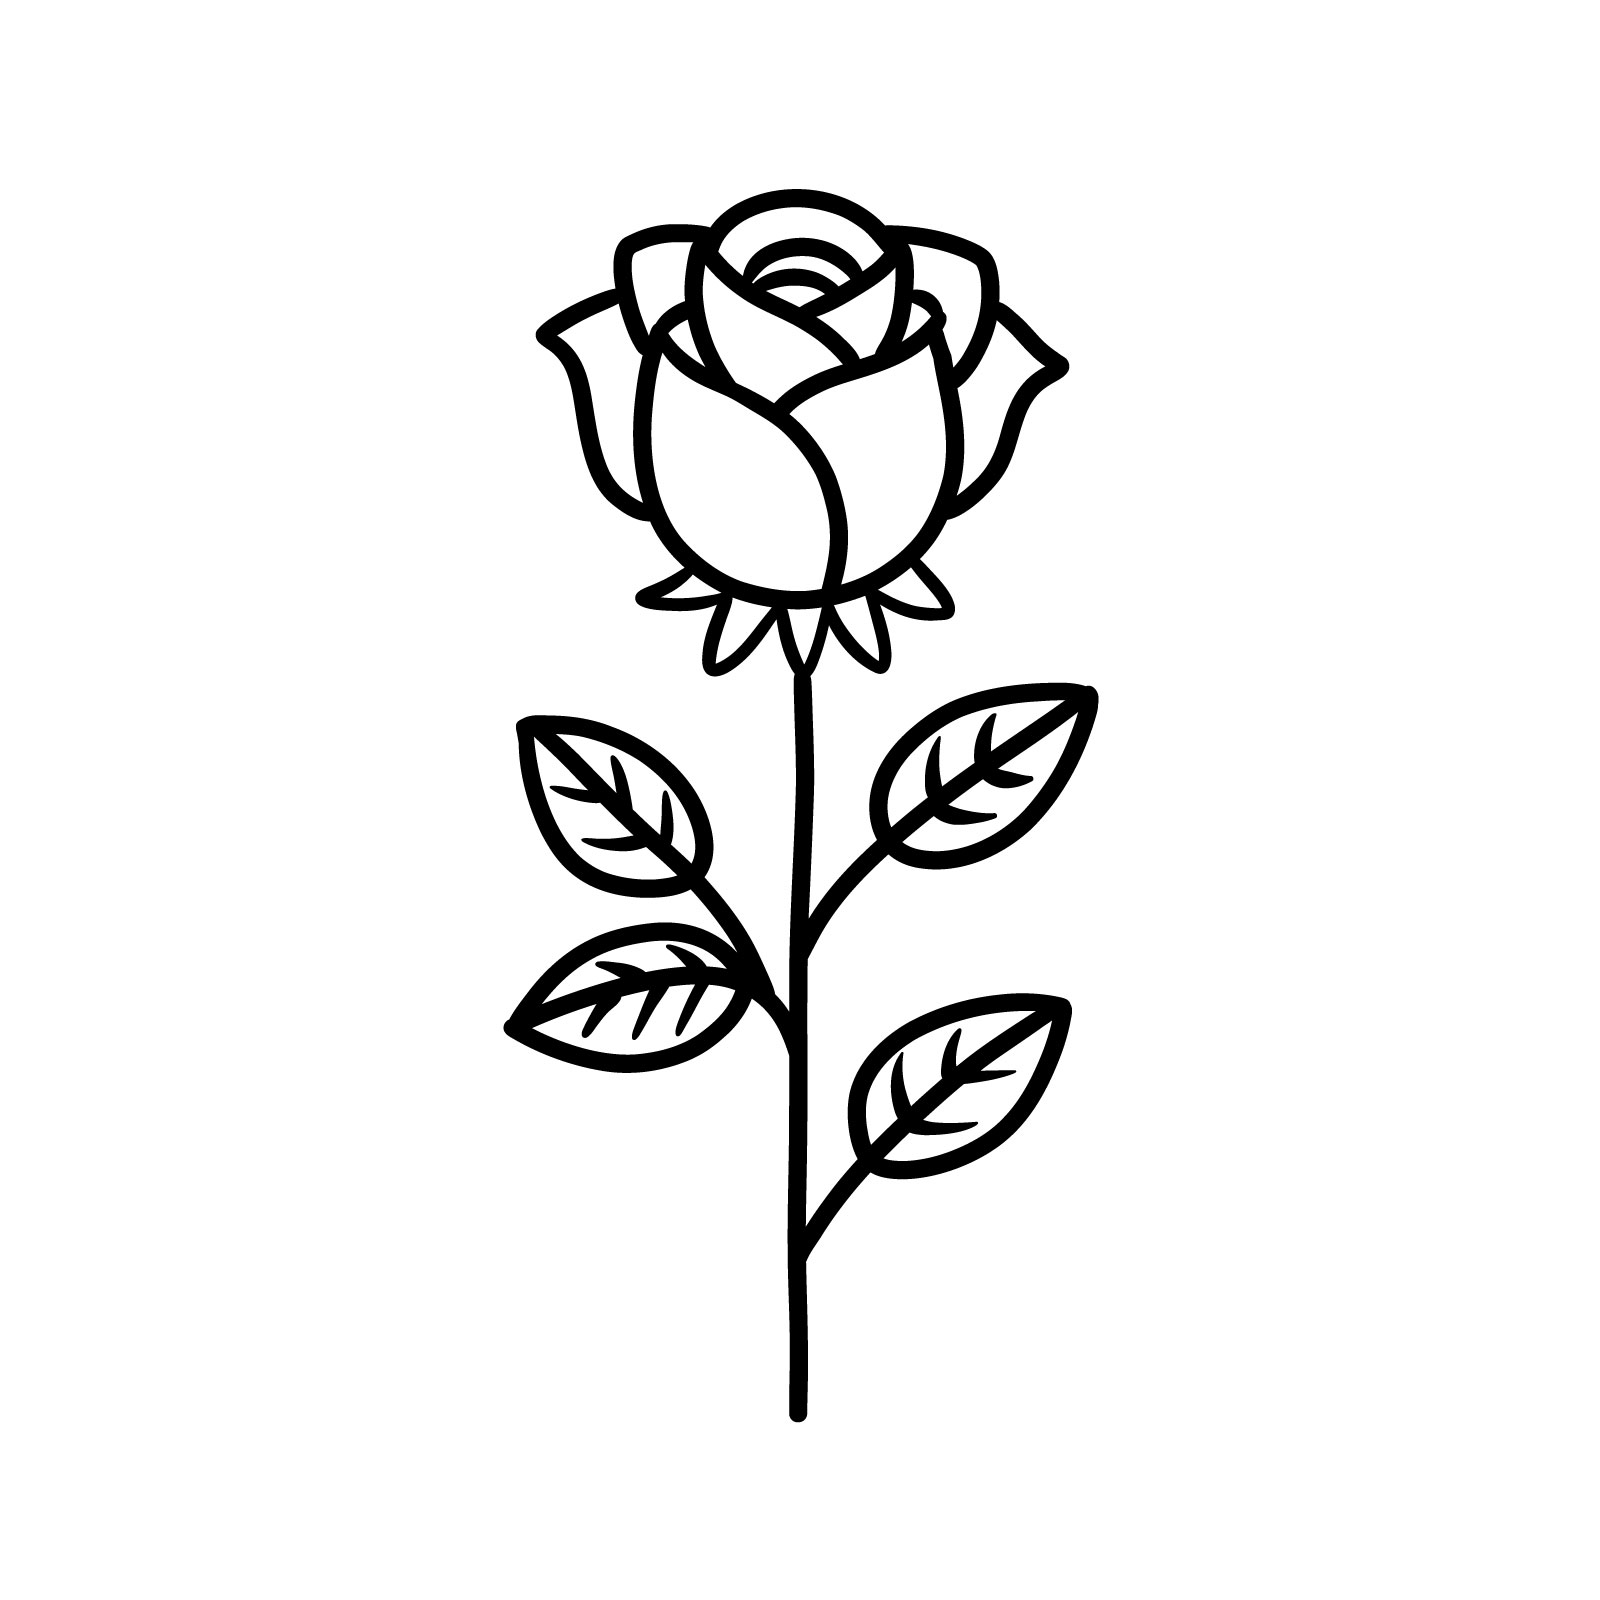 How to Draw a Simple, Quick Rose - Really Cute Drawing Tutorial-saigonsouth.com.vn